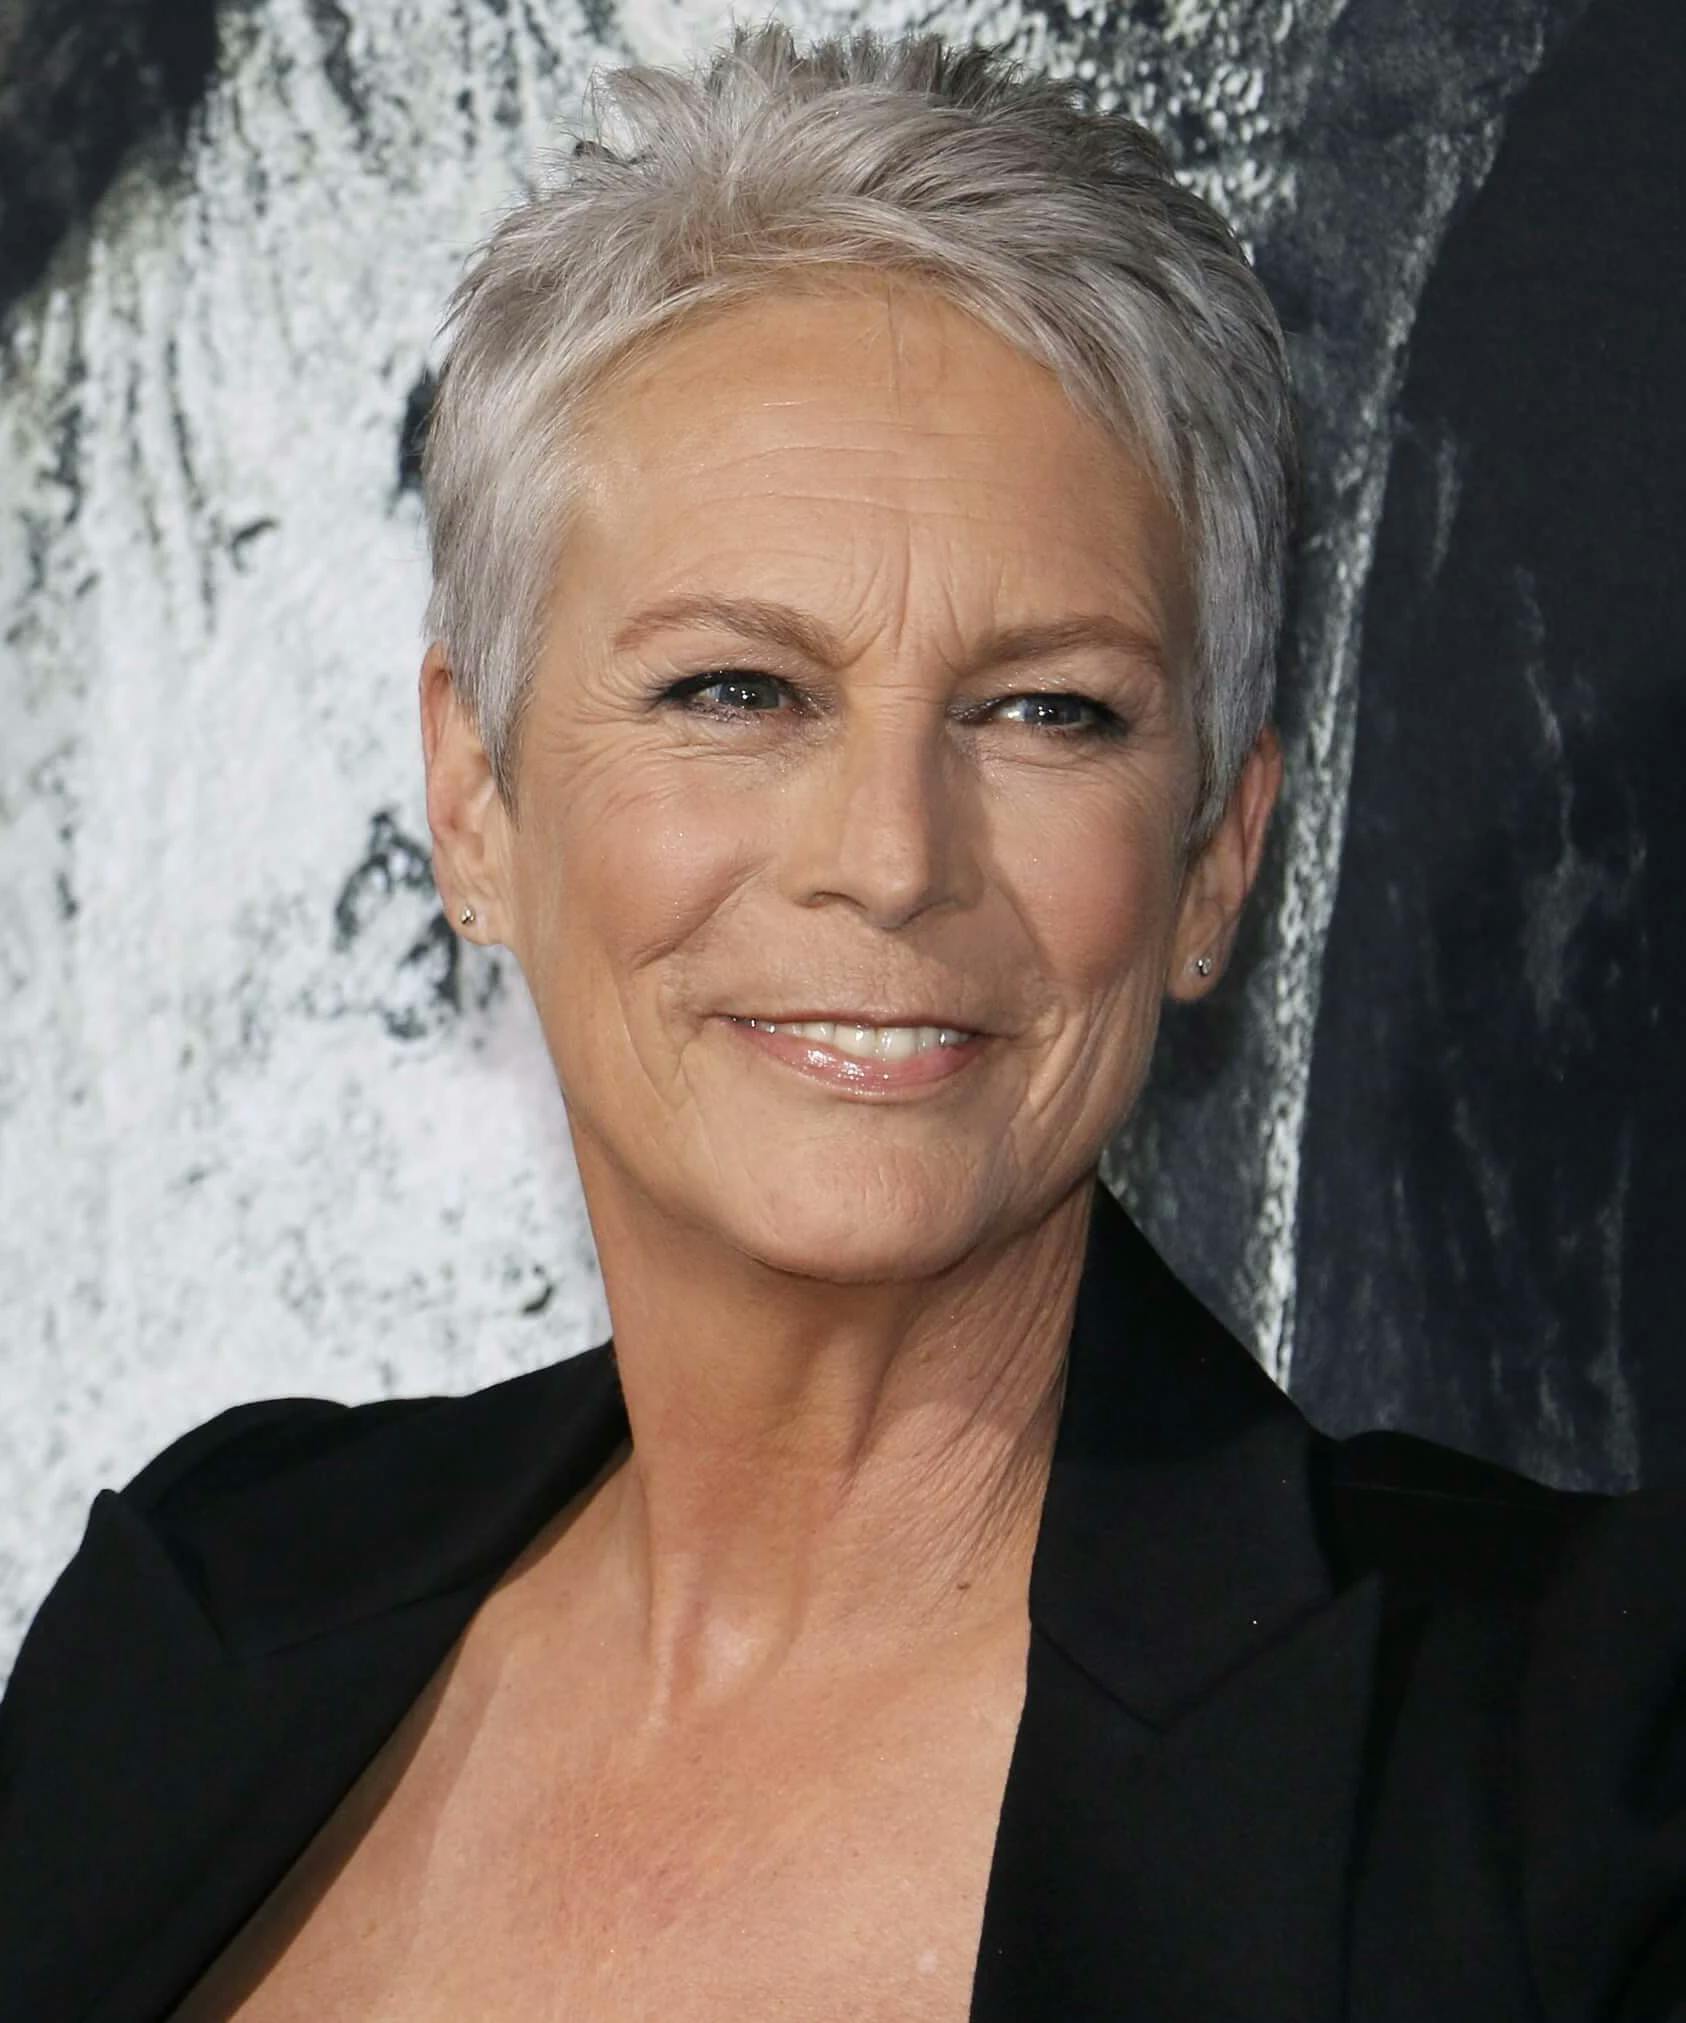 shutterstock Jamie Lee Curtis Disapproves Of Plastic Surgery For ‘Wiping Out Generations Of Beauty’